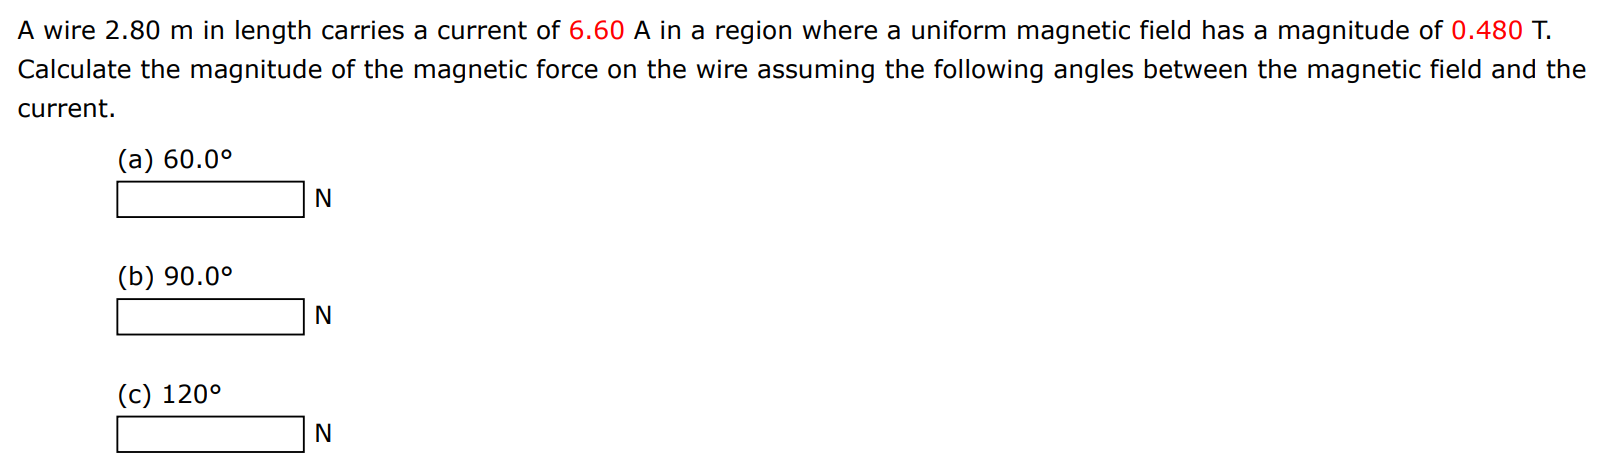 A wire 2.80 m in length carries a current of 6.60 A in a region where a uniform magnetic field has a magnitude of 0.480 T. Calculate the magnitude of the magnetic force on the wire assuming the following angles between the magnetic field and the current. (a) 60.0∘ (b) 90.0∘ N (c) 120∘ N 